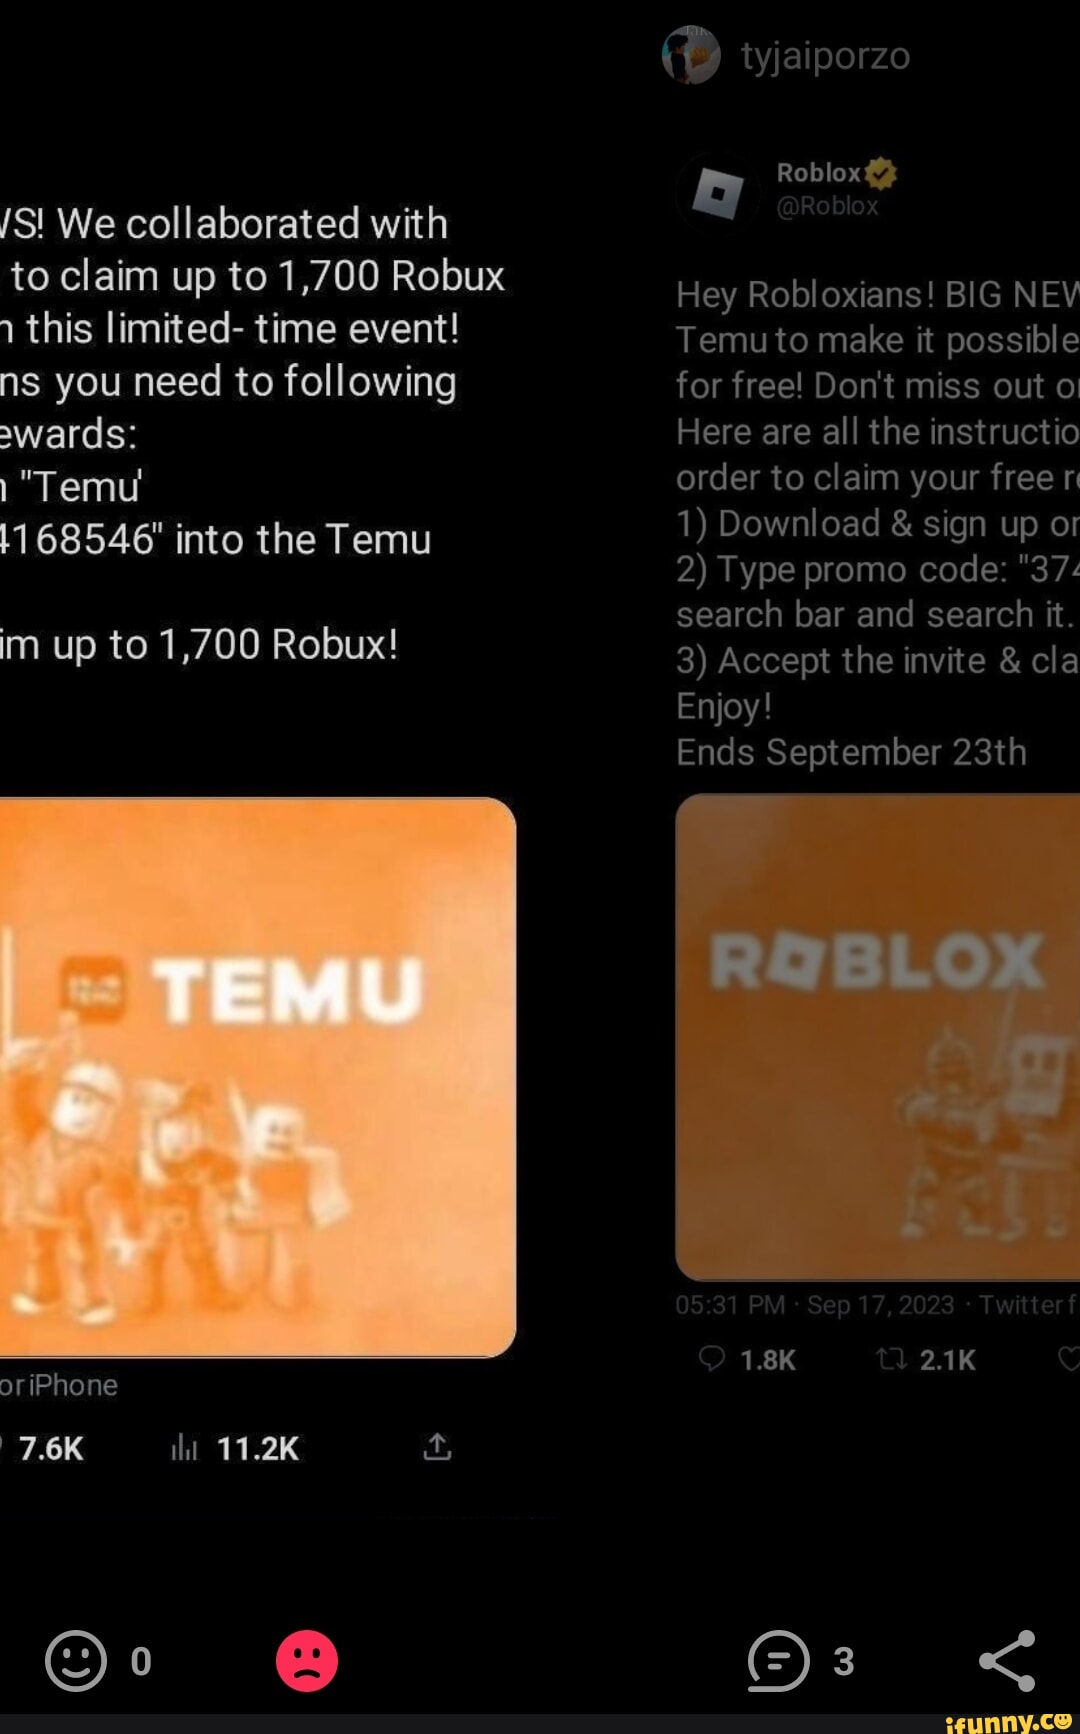 Roblox Hey Robloxians! BIG NEWS! We collaborated with Temu to make it  possible to claim up